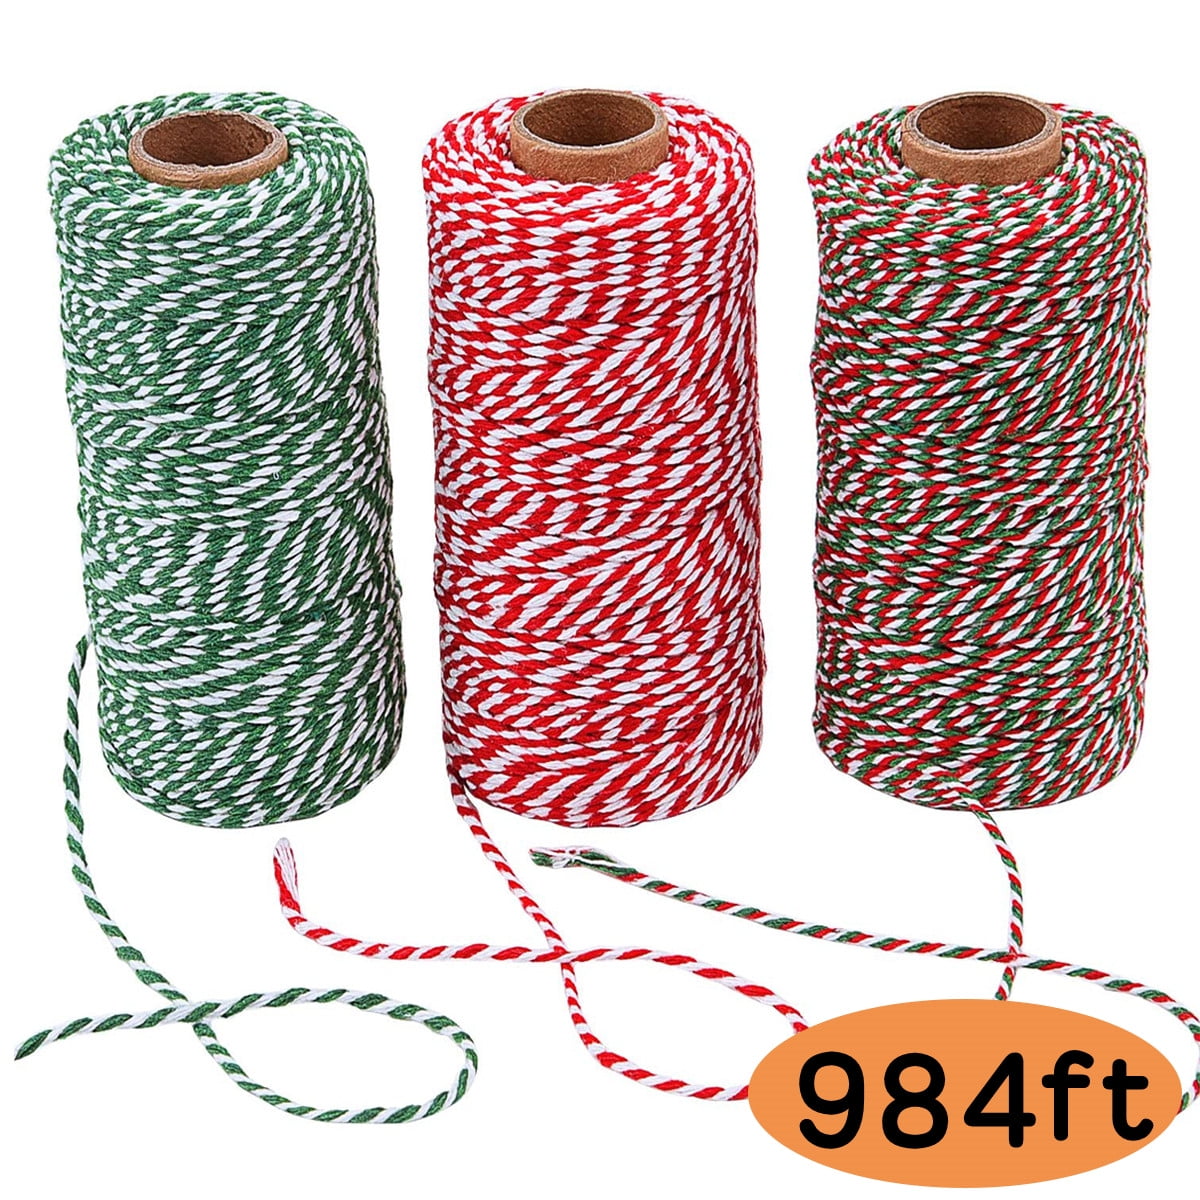 Cotton Twine String for Crafts, Blue Jute Thread (2mm, 218 Yards, 656 Ft)